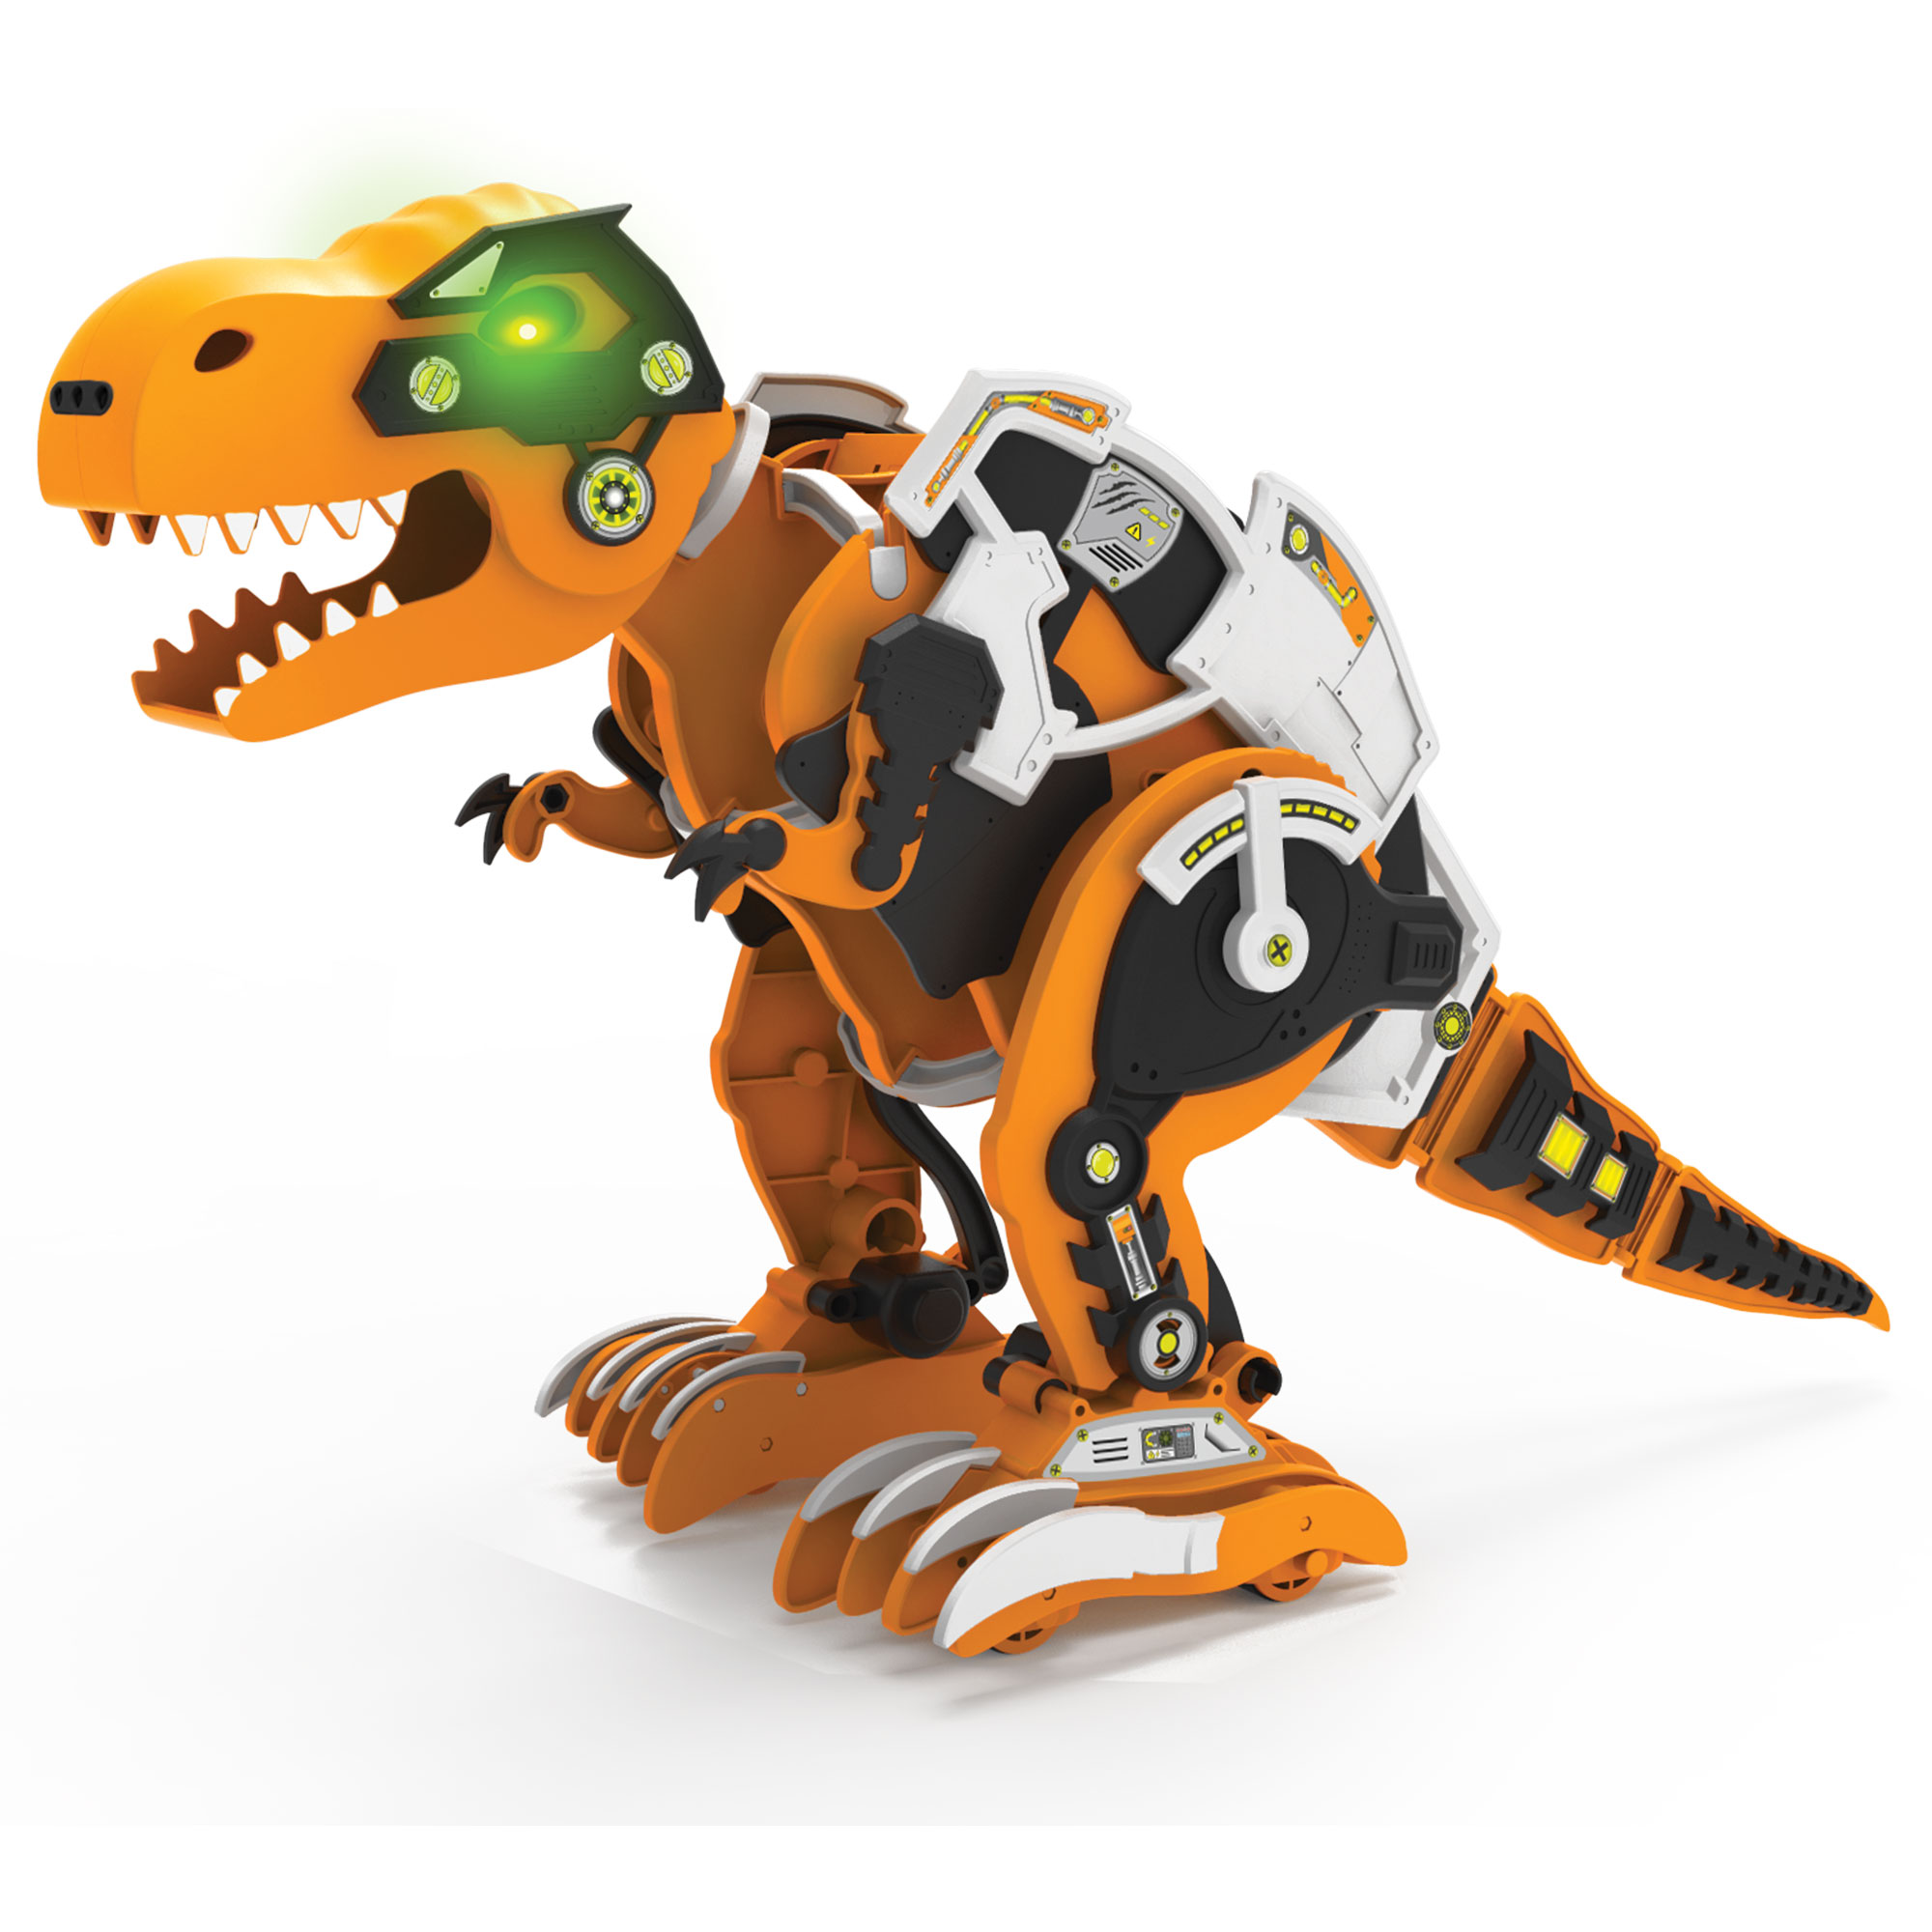 Dino Toy Tanystropheus (Dino robot) Dinosaurs Game for Android